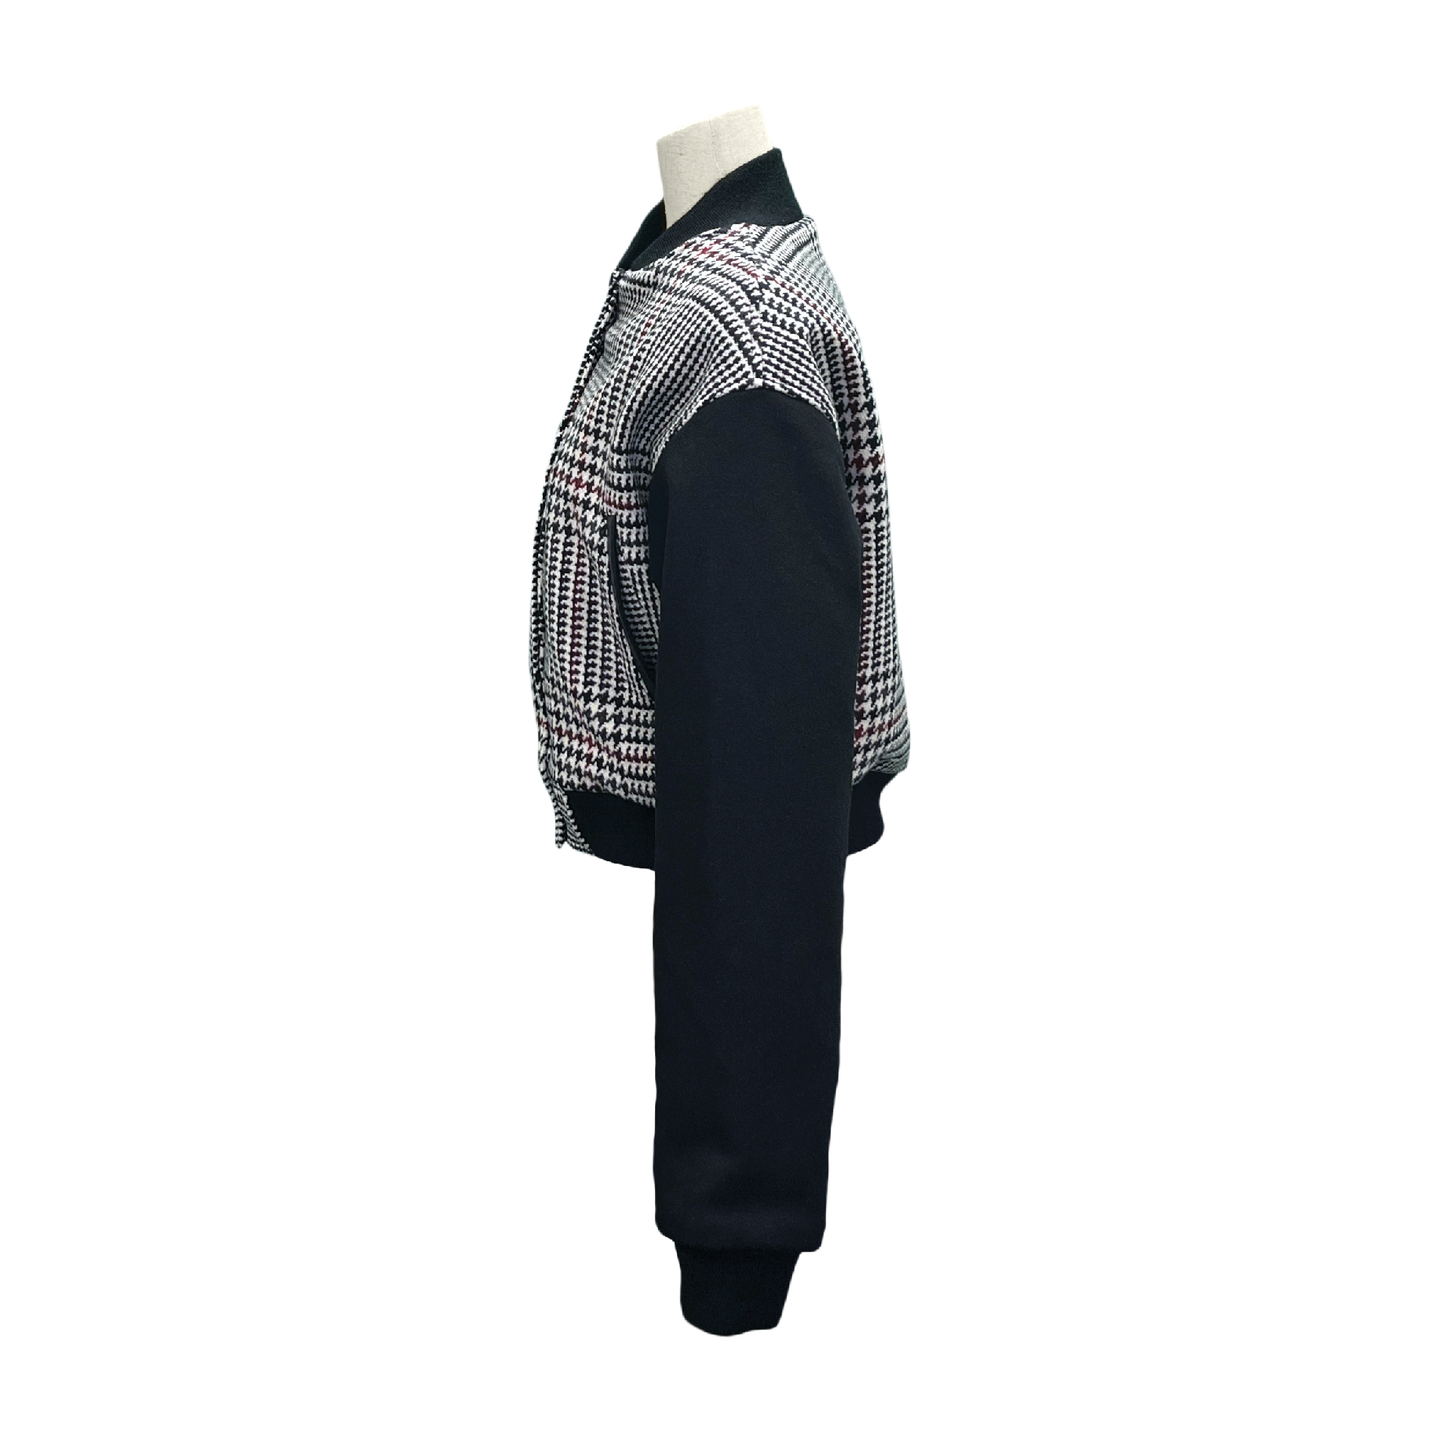 Women’s Cropped Houndstooth Jacket